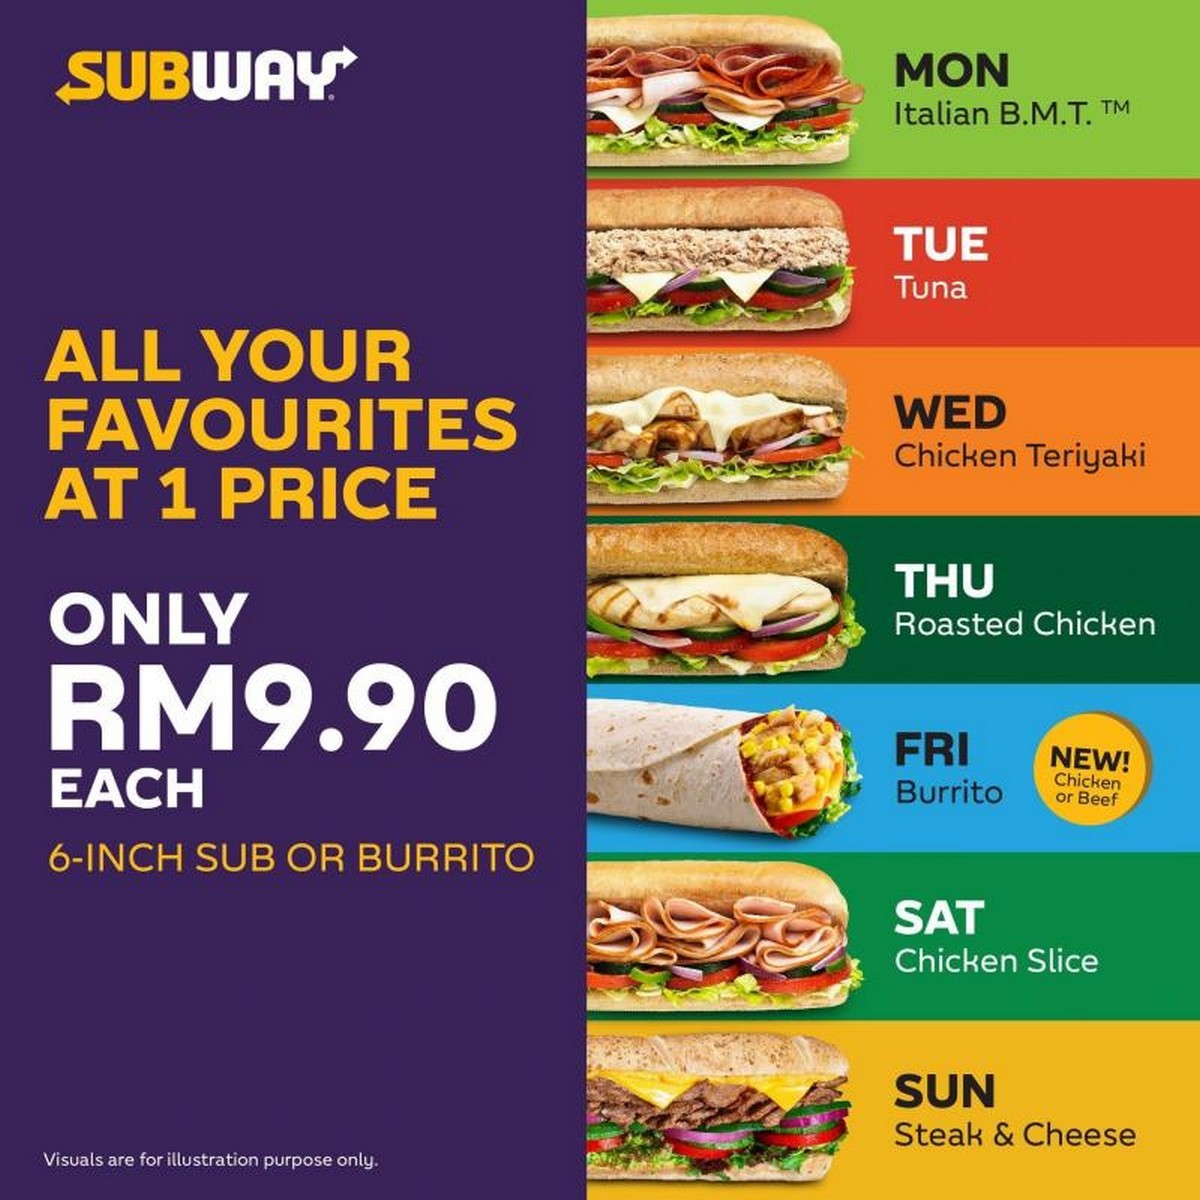 Subway Launch Daily Deals Of Sandwiches Where you can Enjoy For RM 9.90